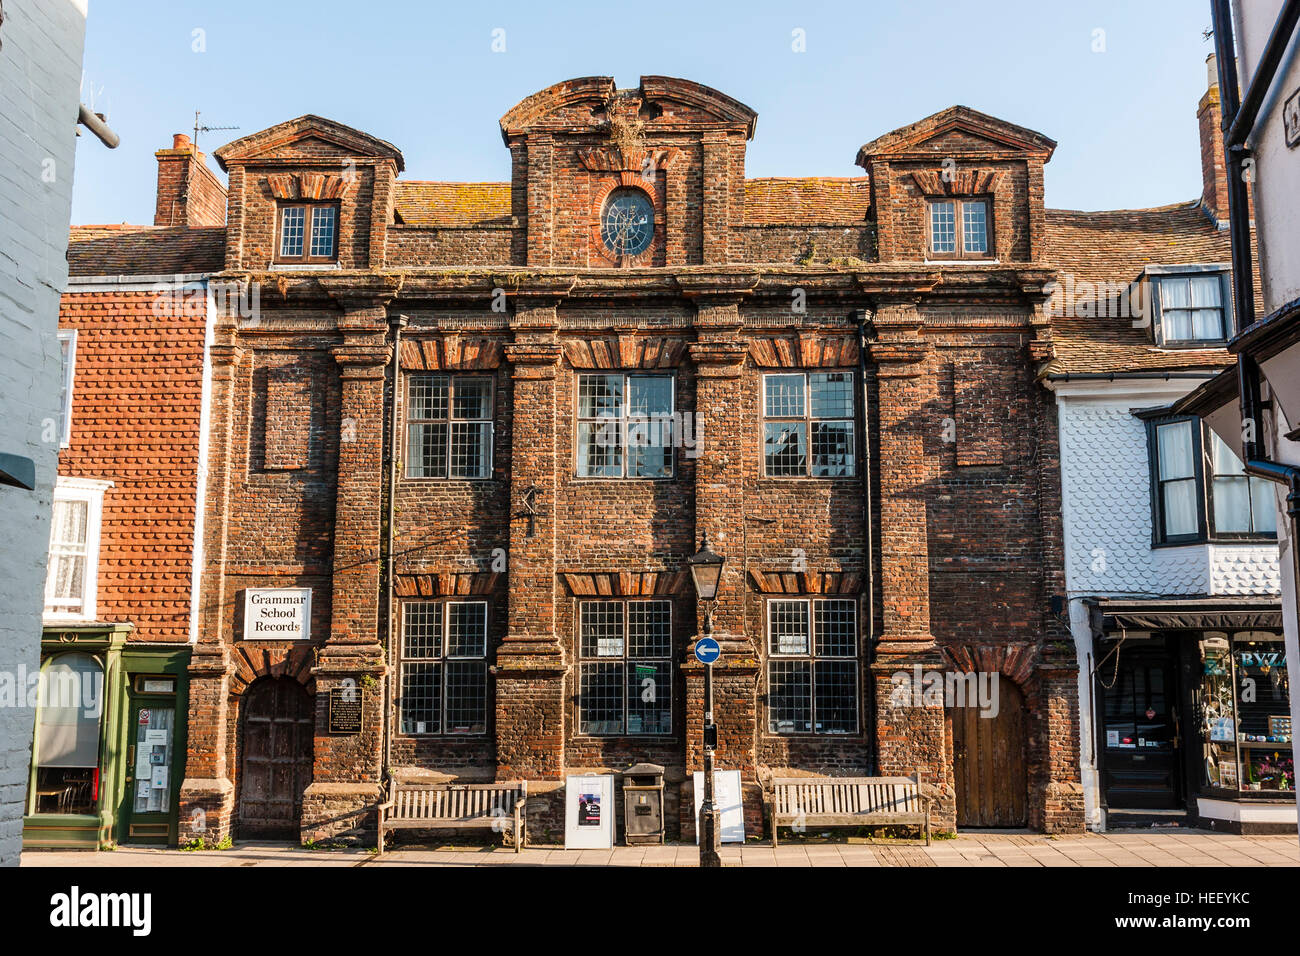 England, Rye. Building, Old Rye Grammar school, now a record shop in High Street. Large imposing brick 3 storey building. Stock Photo